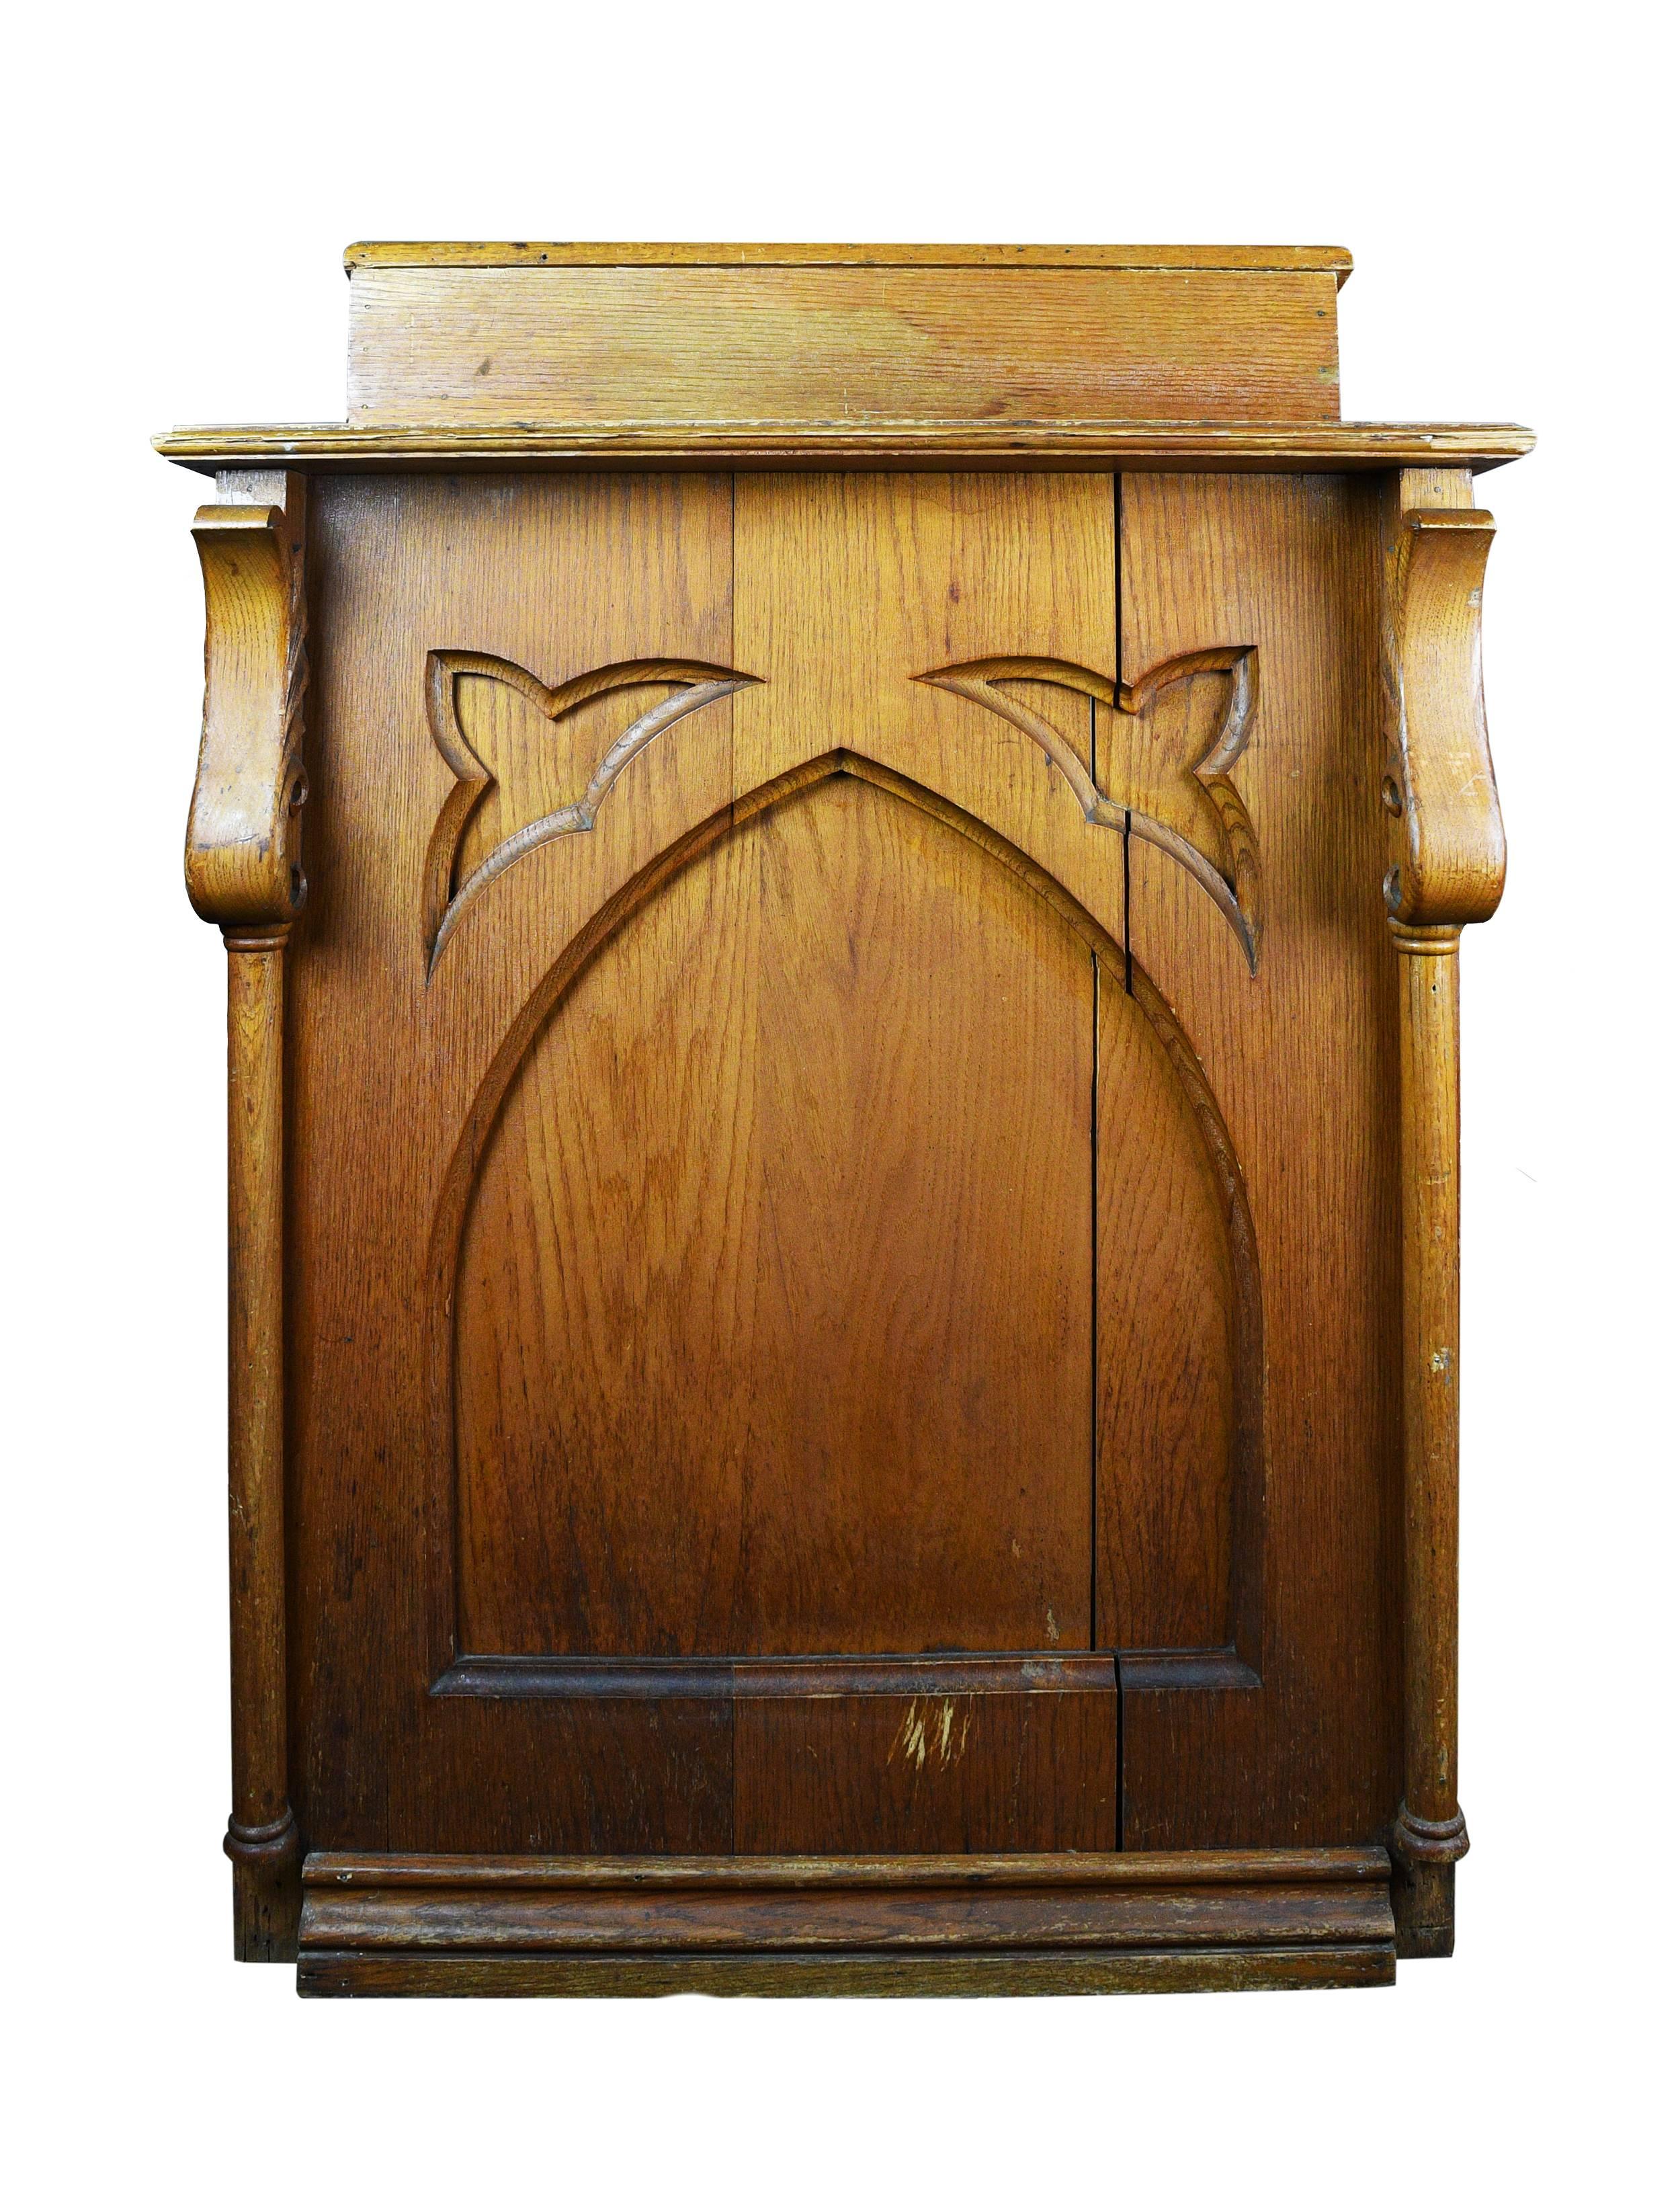 This wonderful Gothic carved oak lectern features a large, recessed lancet arch surrounded by trifoil designs on either side. Curving, leaf-like adornments flank either side, adding an organic touch. A crack, approximately 1/8” thick, runs along one